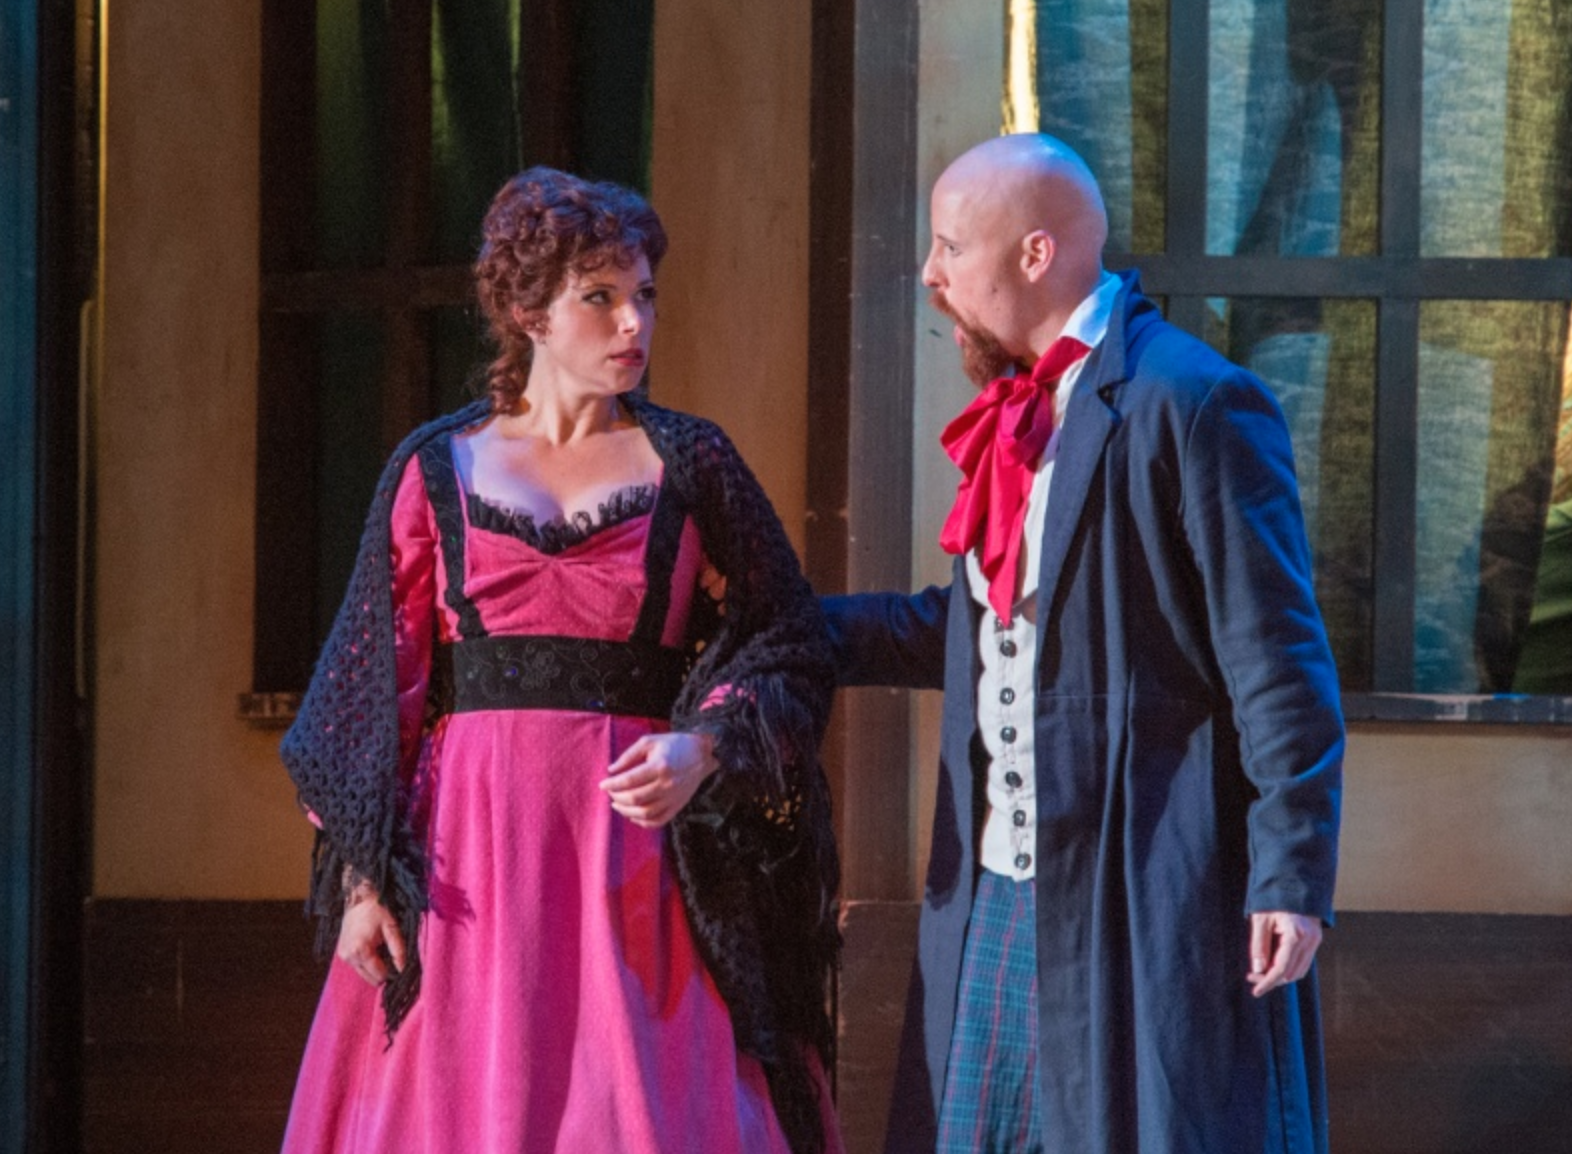  “… Colleen Daly as the opportunistic coquette, Musetta, stole the show… Blessed with a soprano voice that is light with surprising reserves of power, she dominated the stage with a delightful sense of comic timing and the exuberance the role needs. 